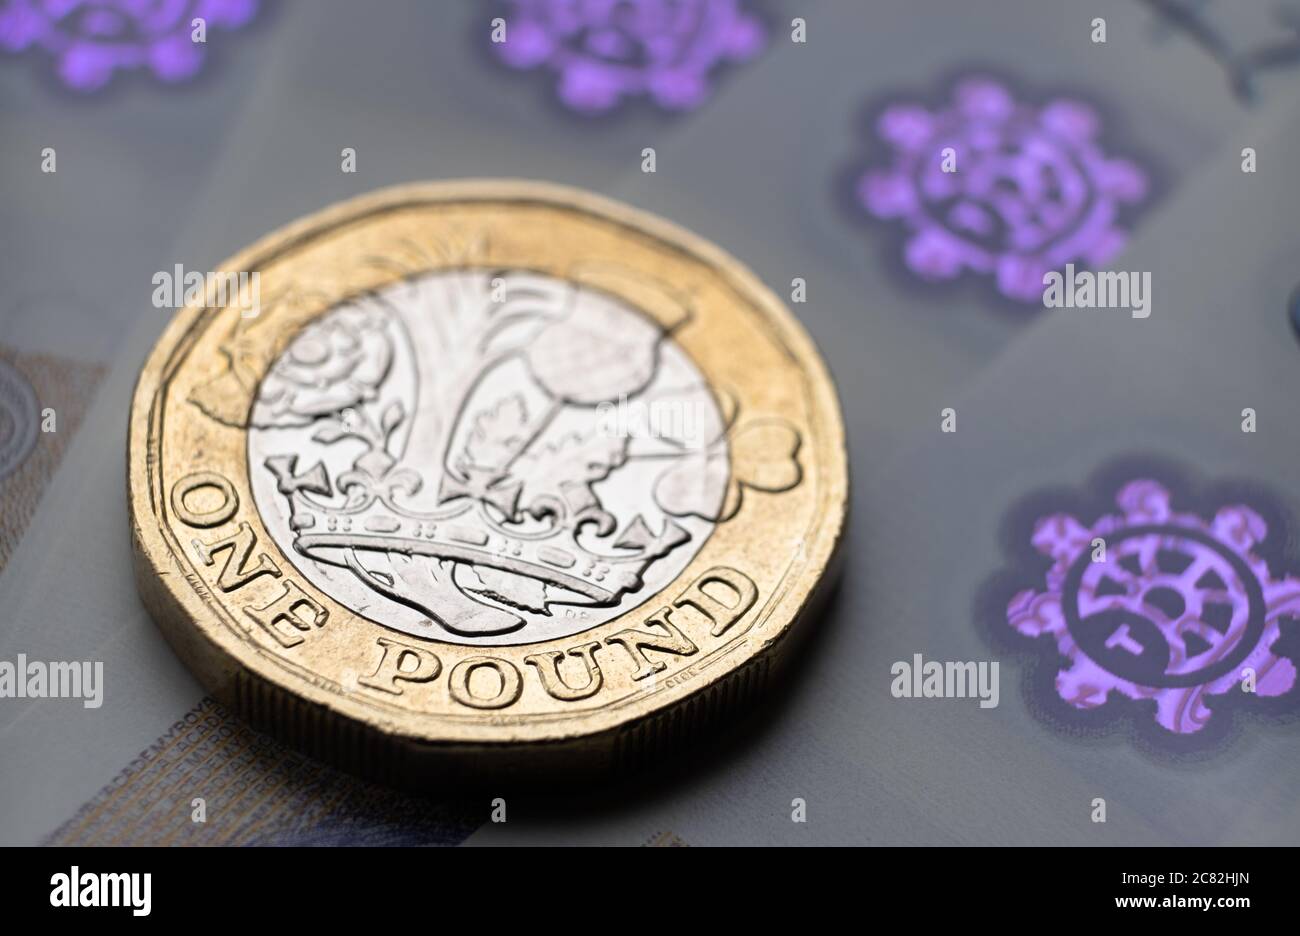 British one Pound coin place on top of new polymer banknotes with visible pound symbol and hologram, Stock Photo